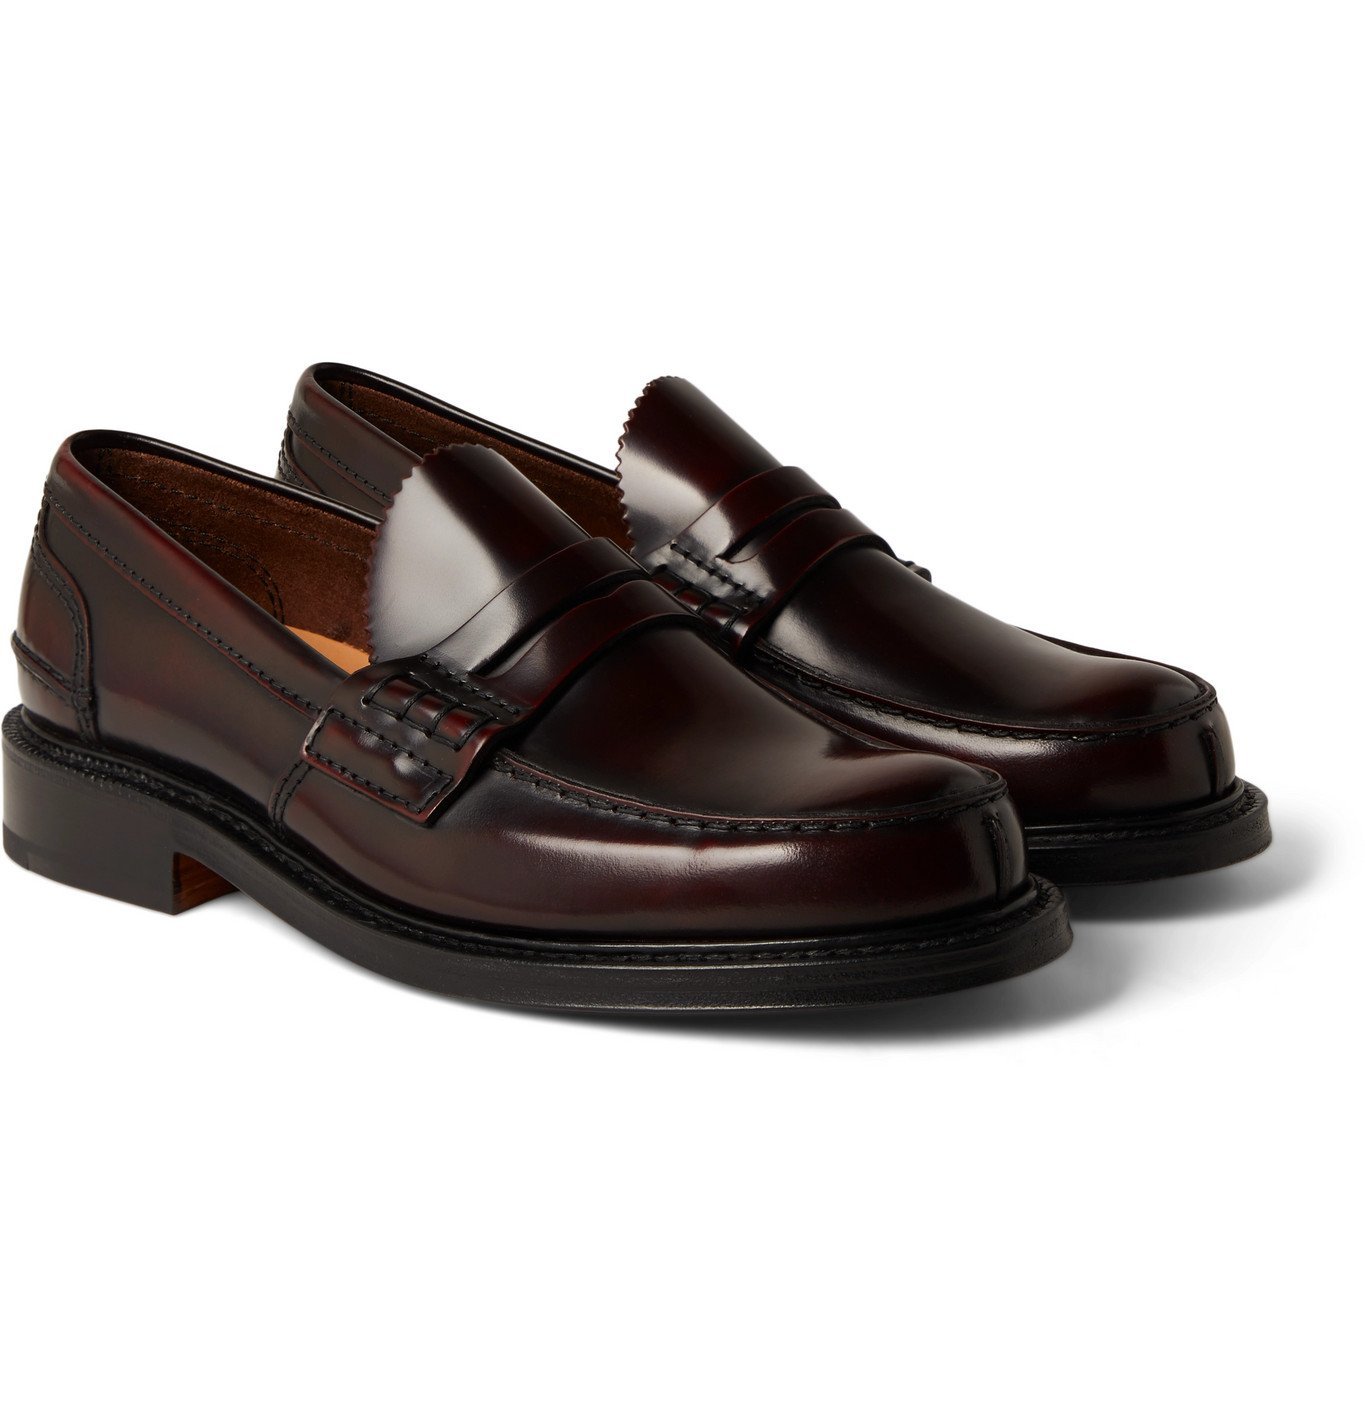 Church's - Willenhall Bookbinder Fumè Leather Penny Loafers - Burgundy ...